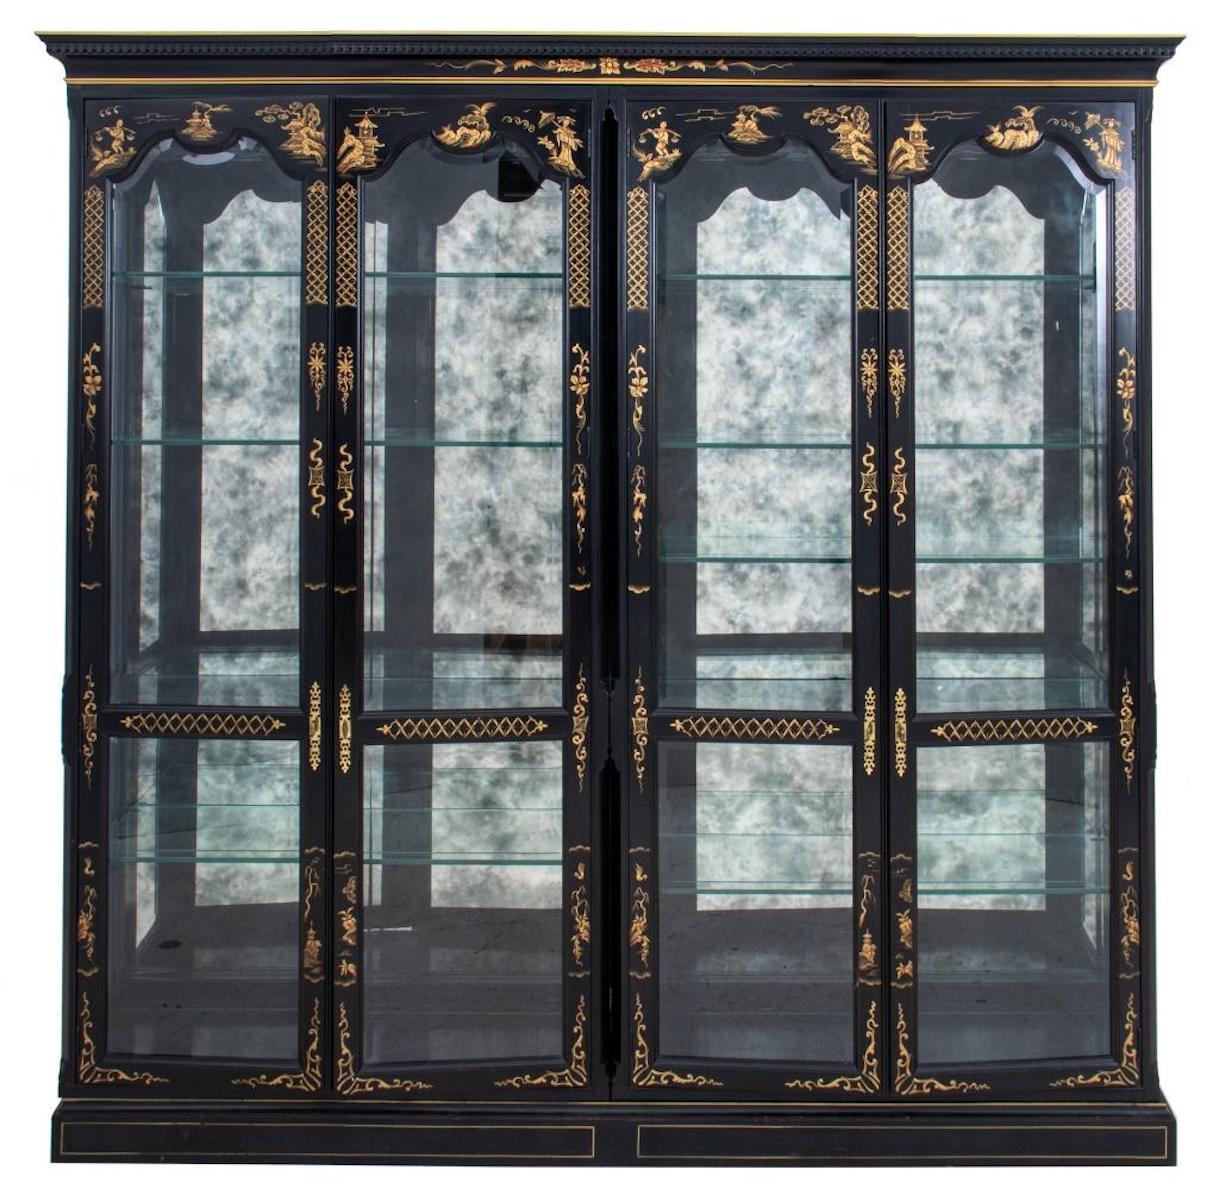  Chinoiserie Display Cabinet / Hand Gilt Black Lacquered Wood Vitrine For Sale 10